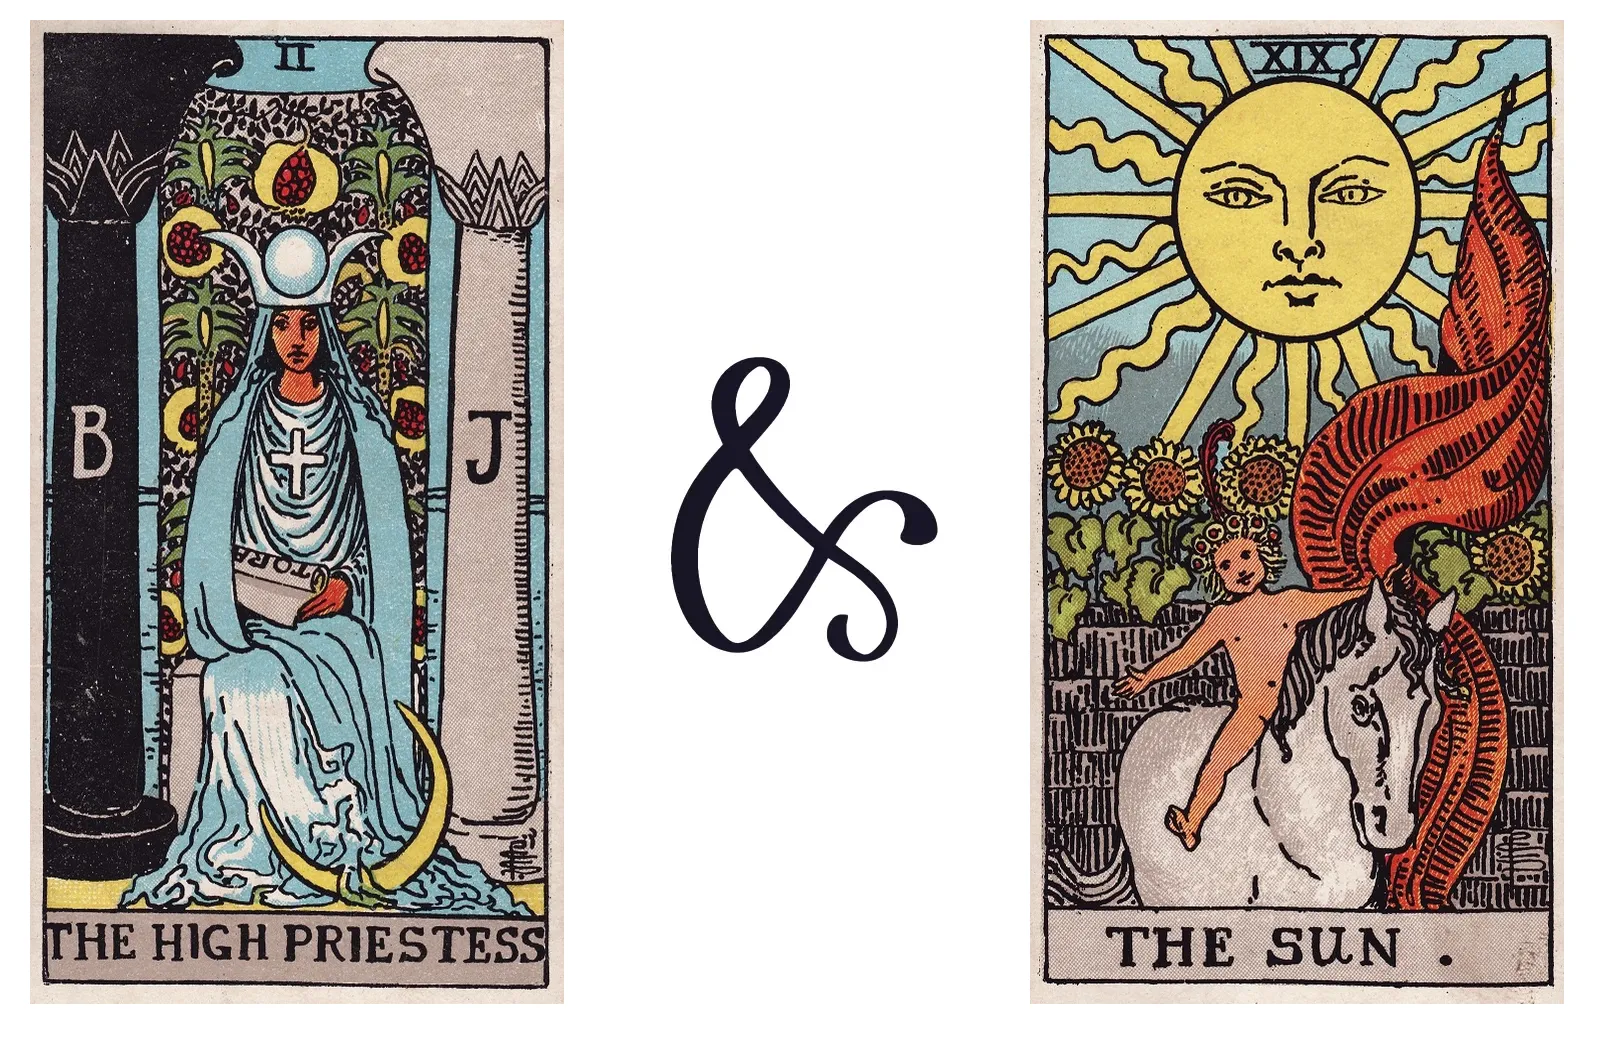 The High Priestess and The Sun